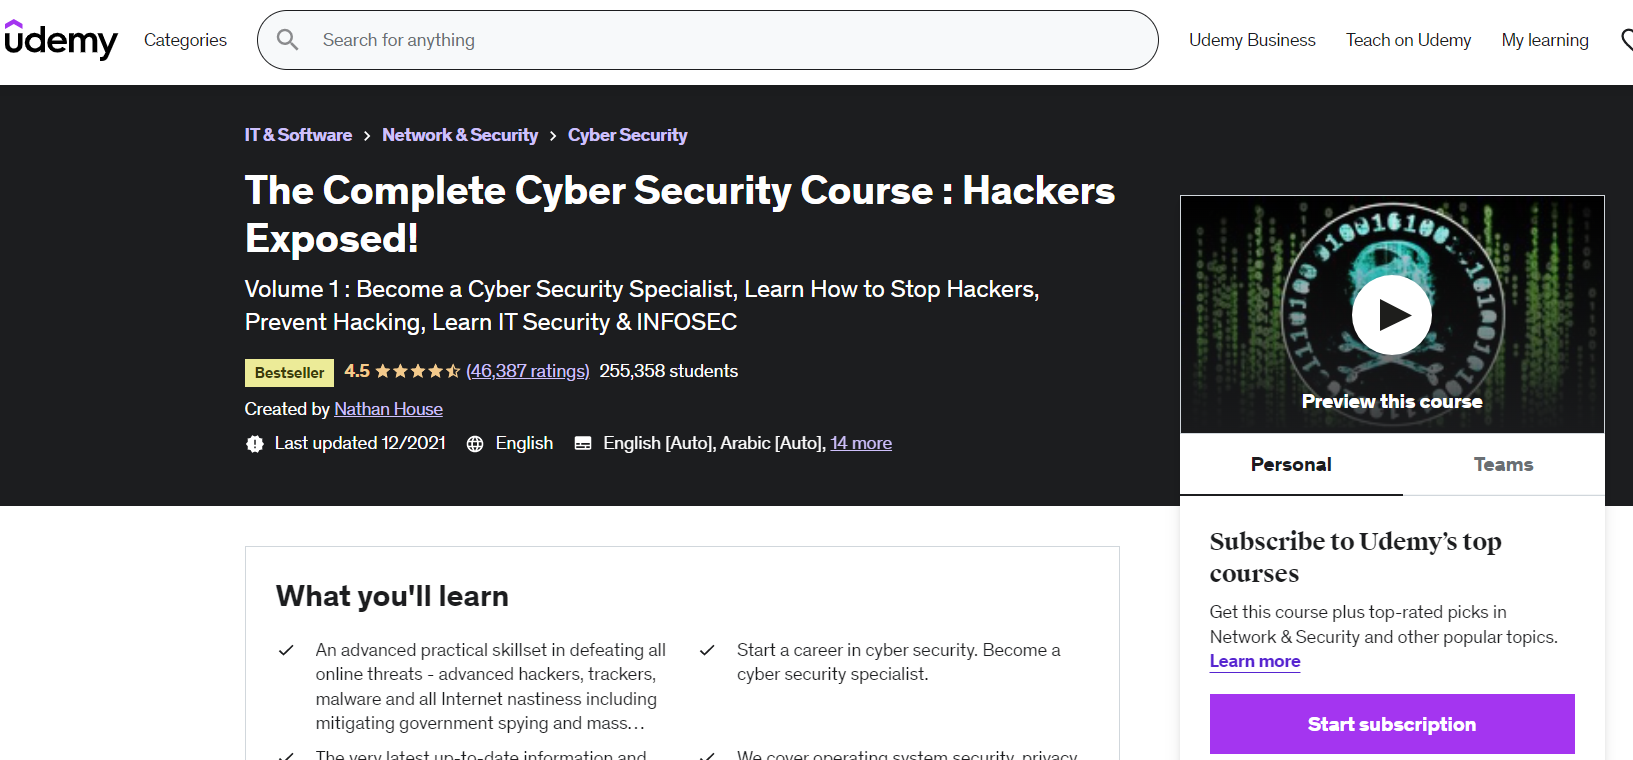 The Complete Cyber Security Course Hackers Exposed